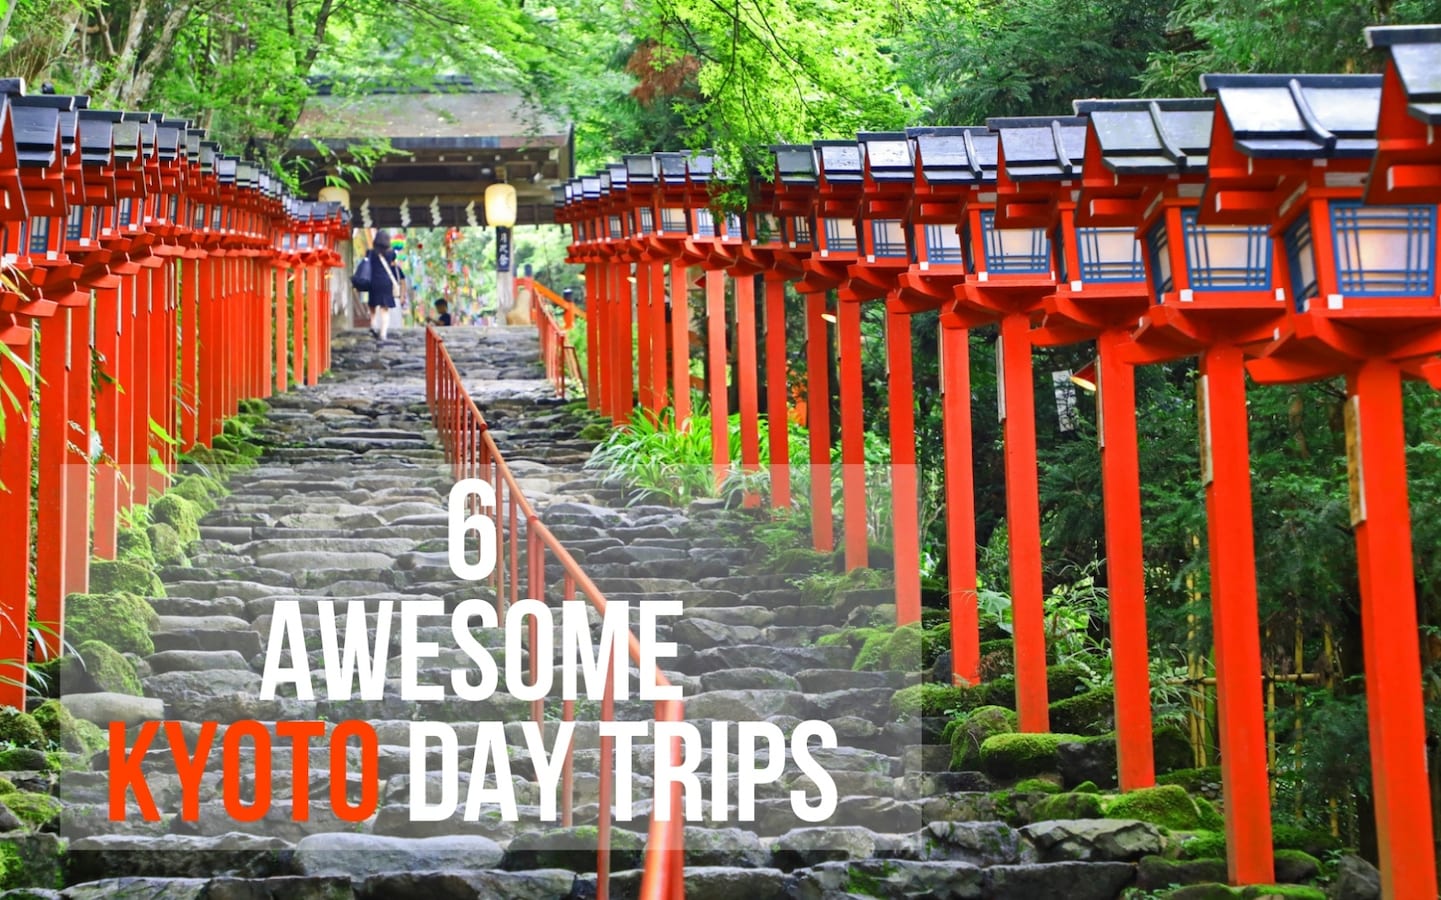 one day trip to kyoto from tokyo